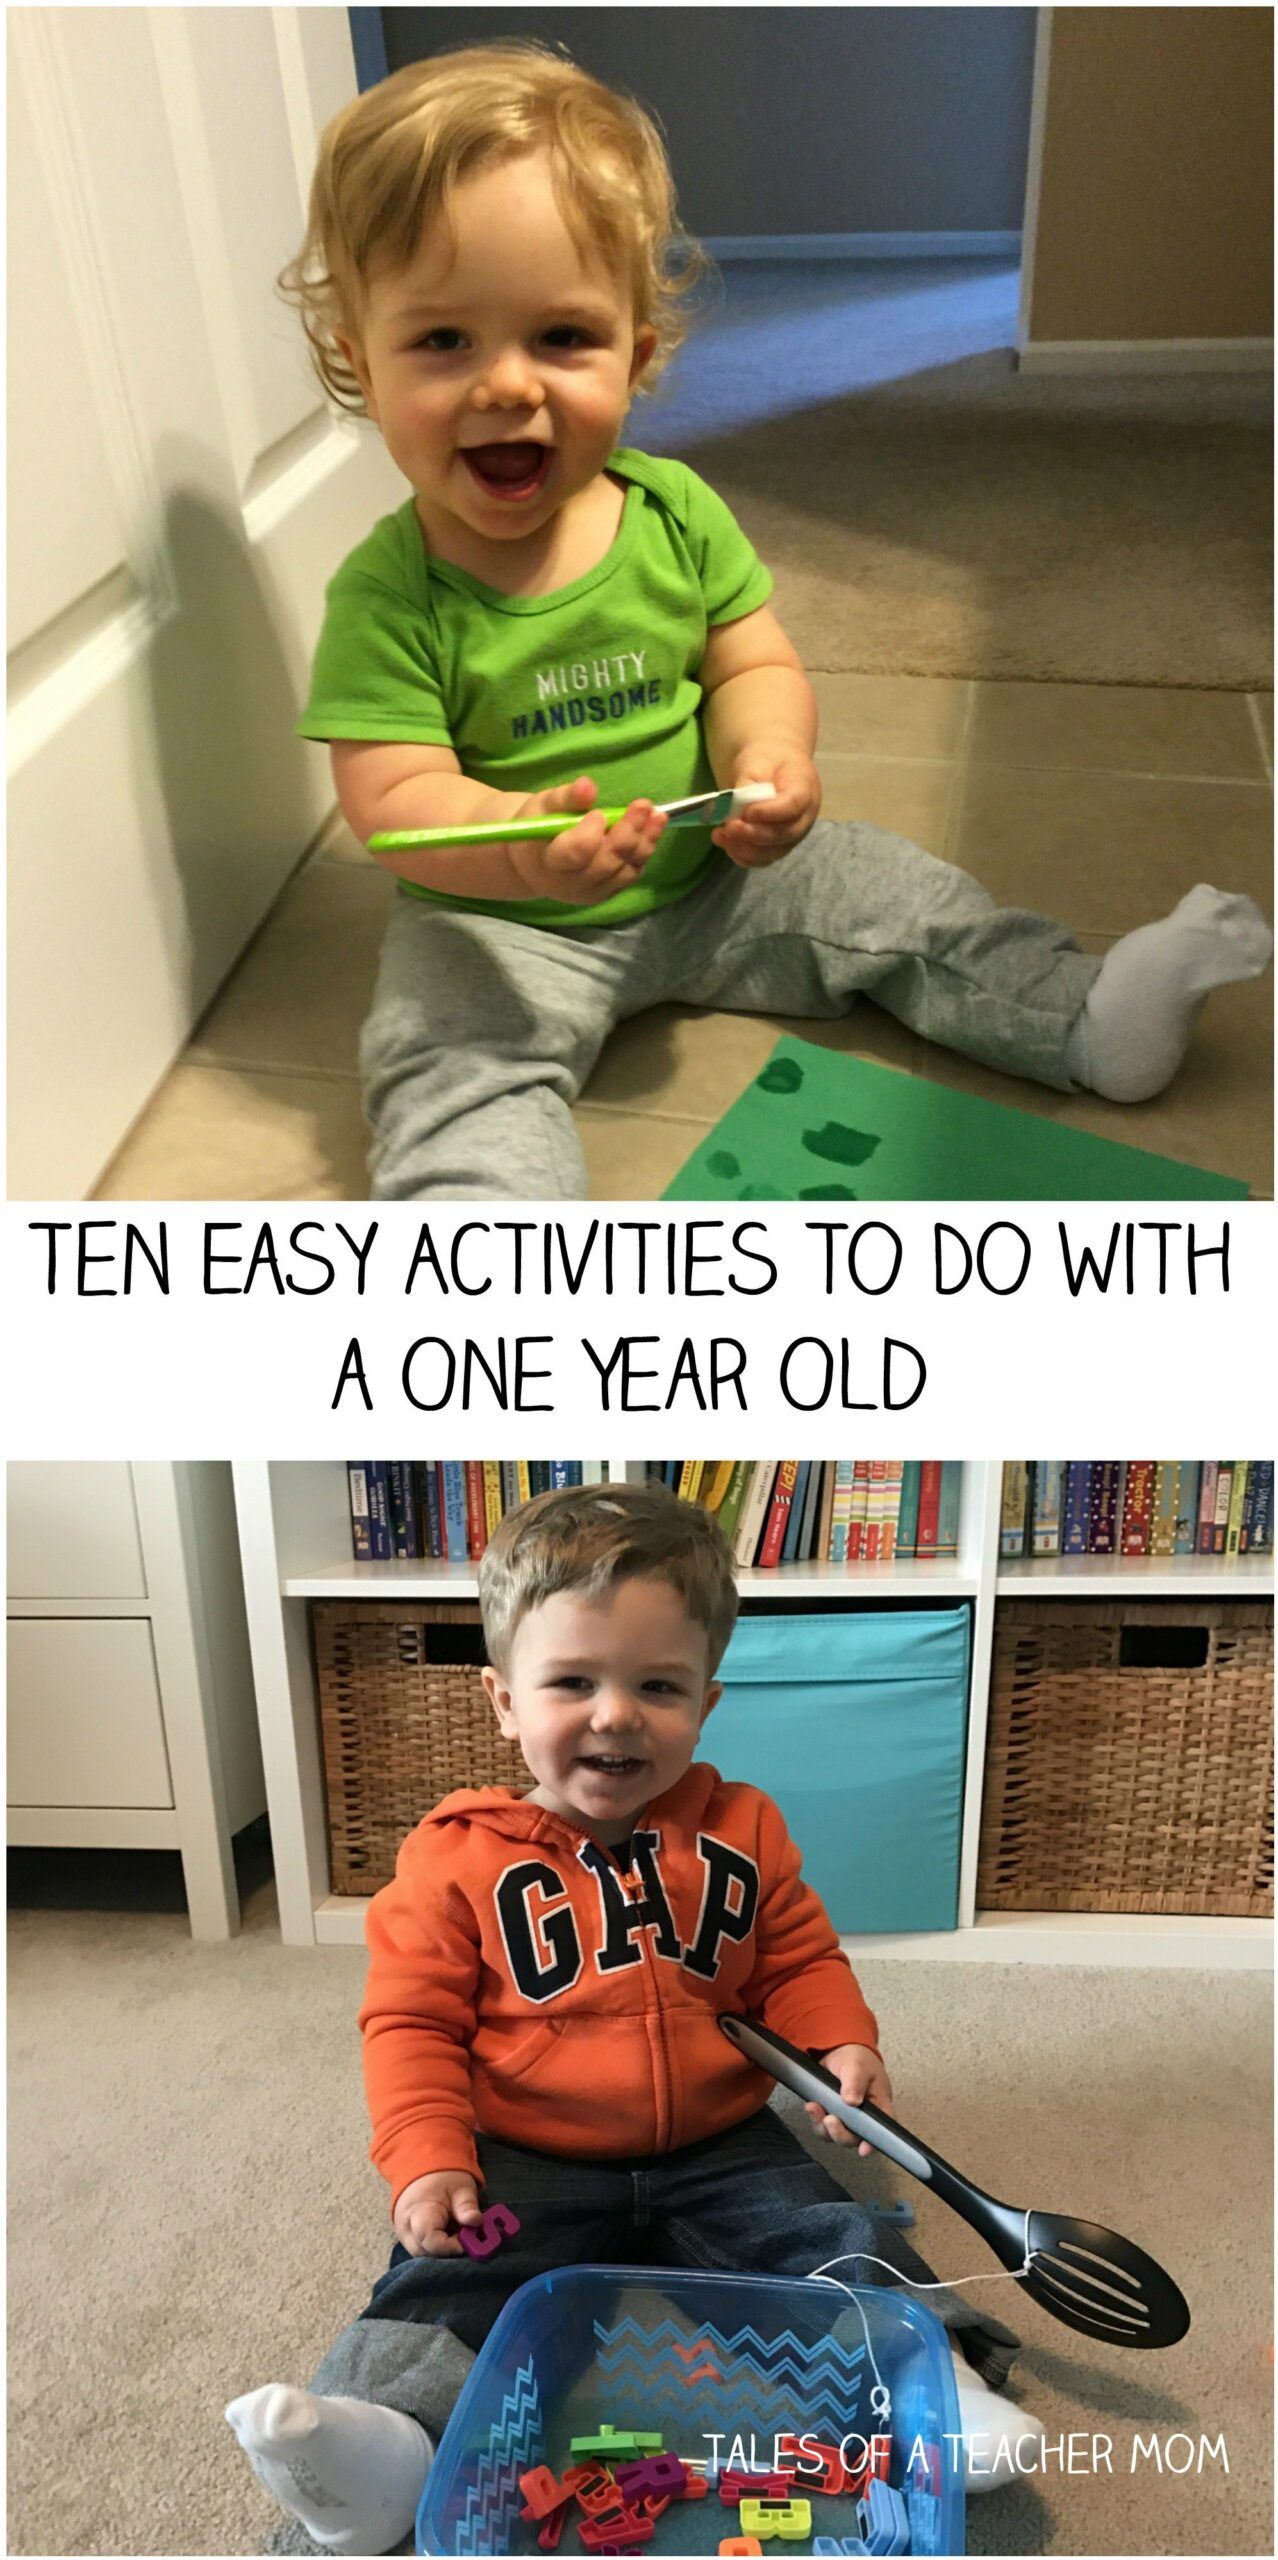 Ten Easy Activities To Do With a One Year Old -   24 easy crafts for 10 year olds ideas